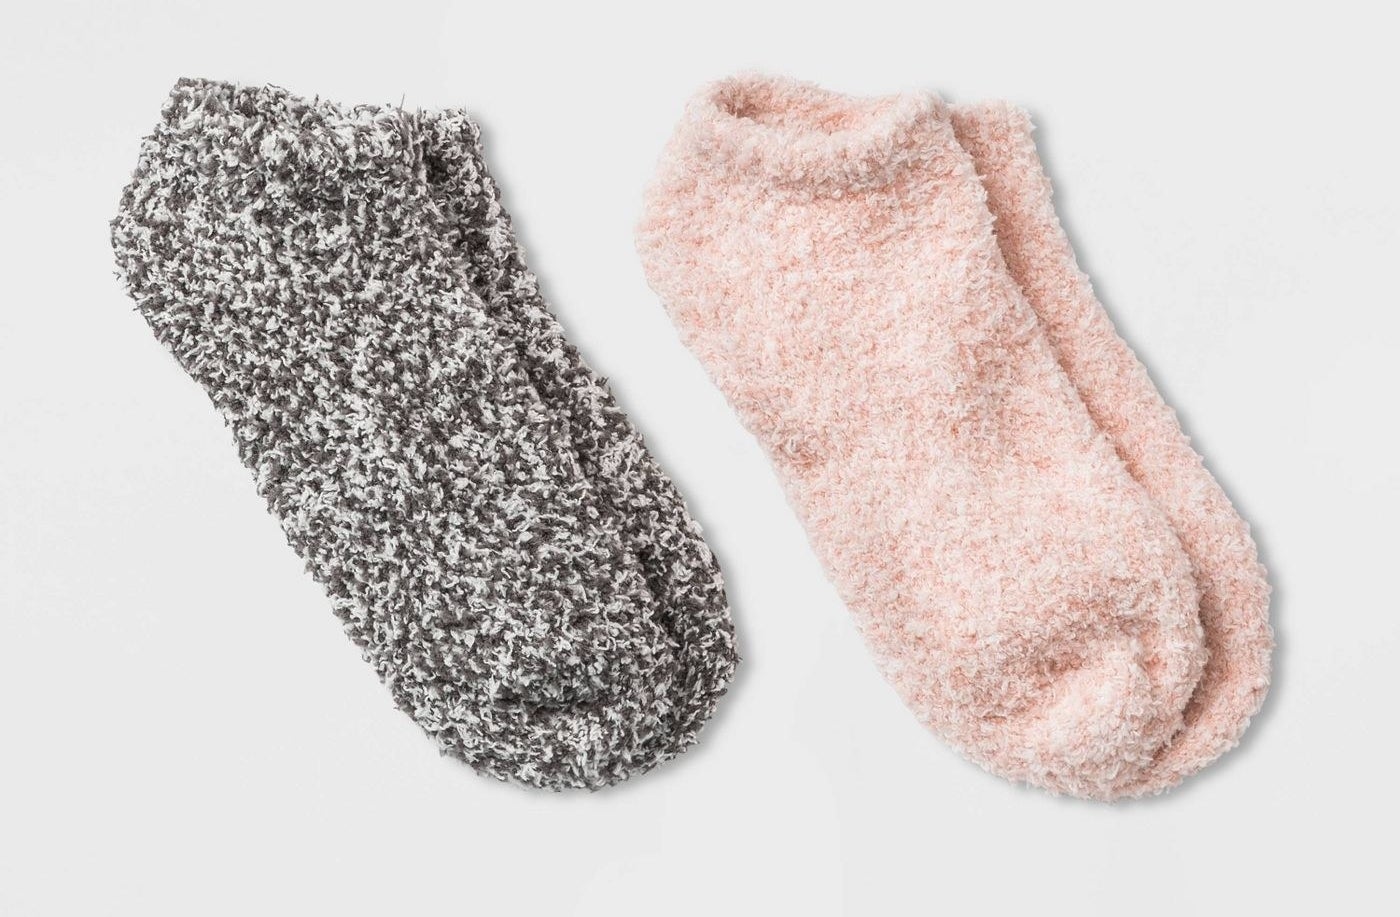 The pink/charcoal stretchy marbled socks